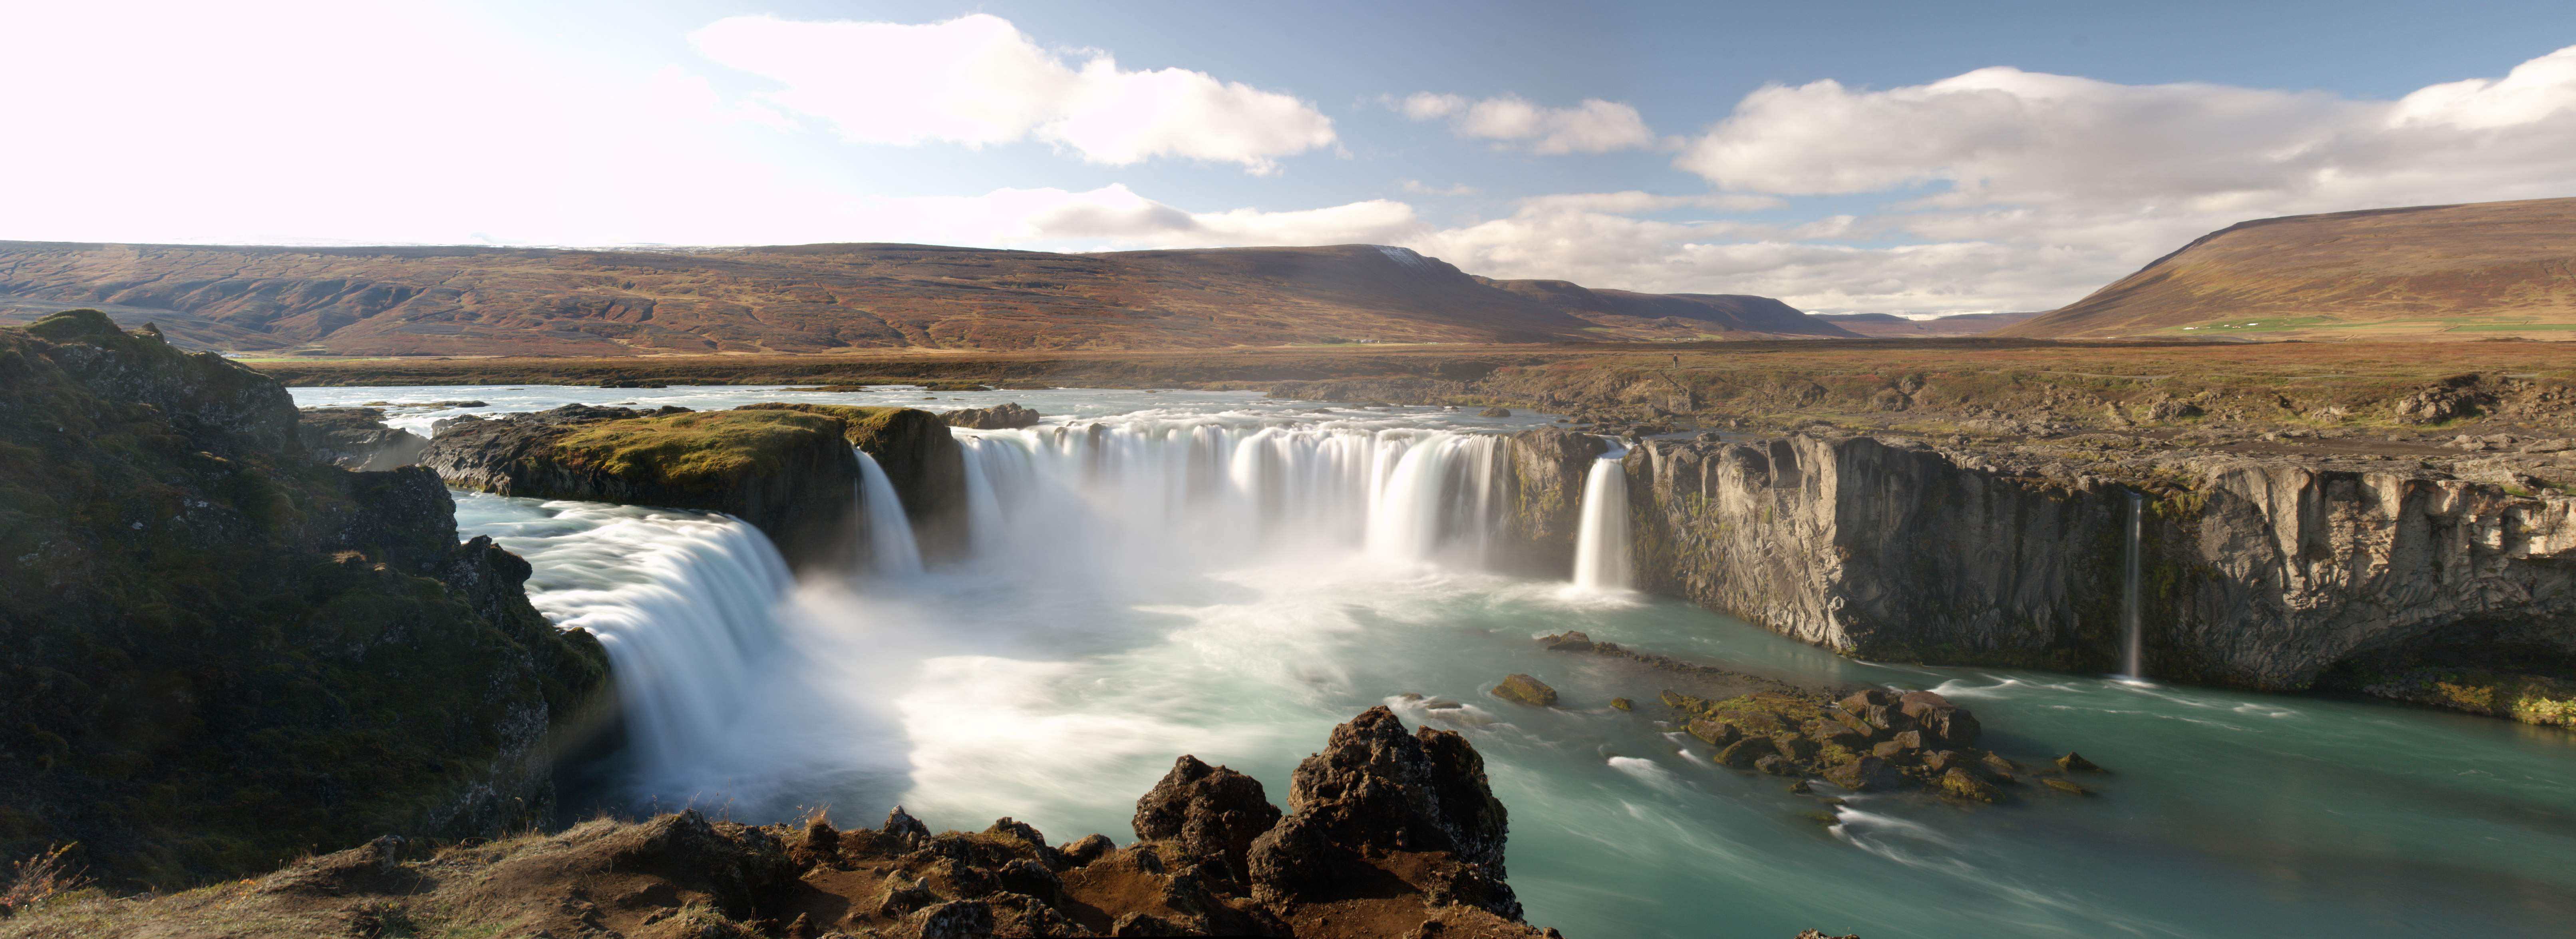 Goðafoss - Waterfall in Iceland - Thousand Wonders